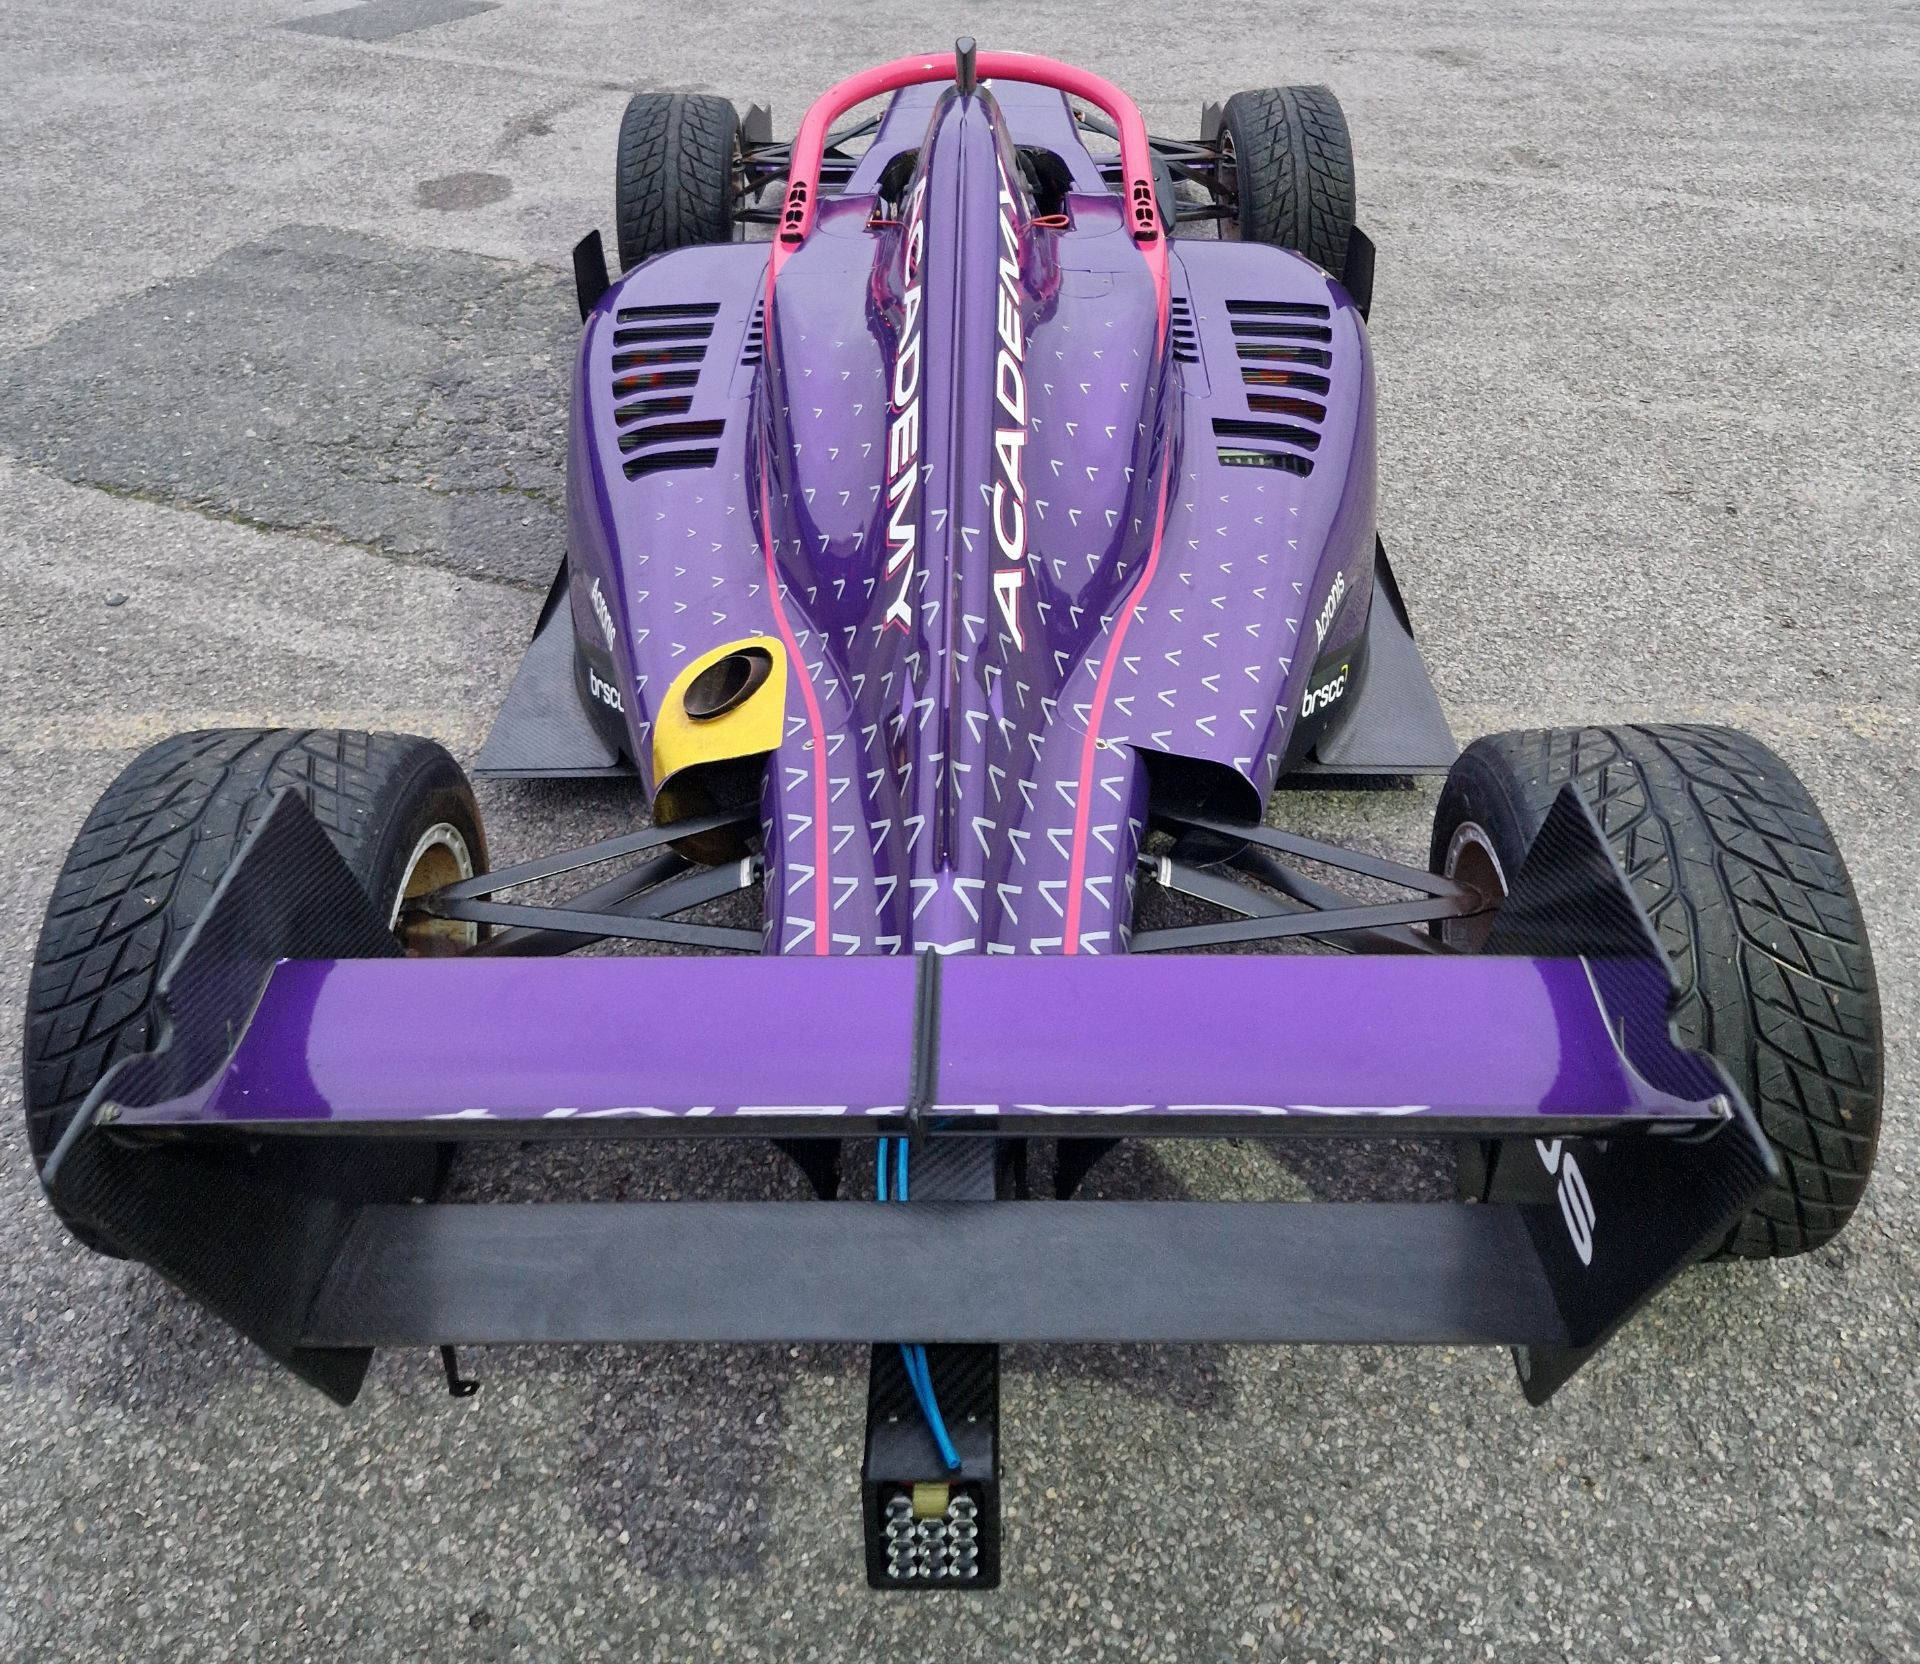 One TATUUS F3 T-318 Alfa Romeo Race Car Chassis No. 057 (2019) Finished in the W Series Academy - Image 4 of 7